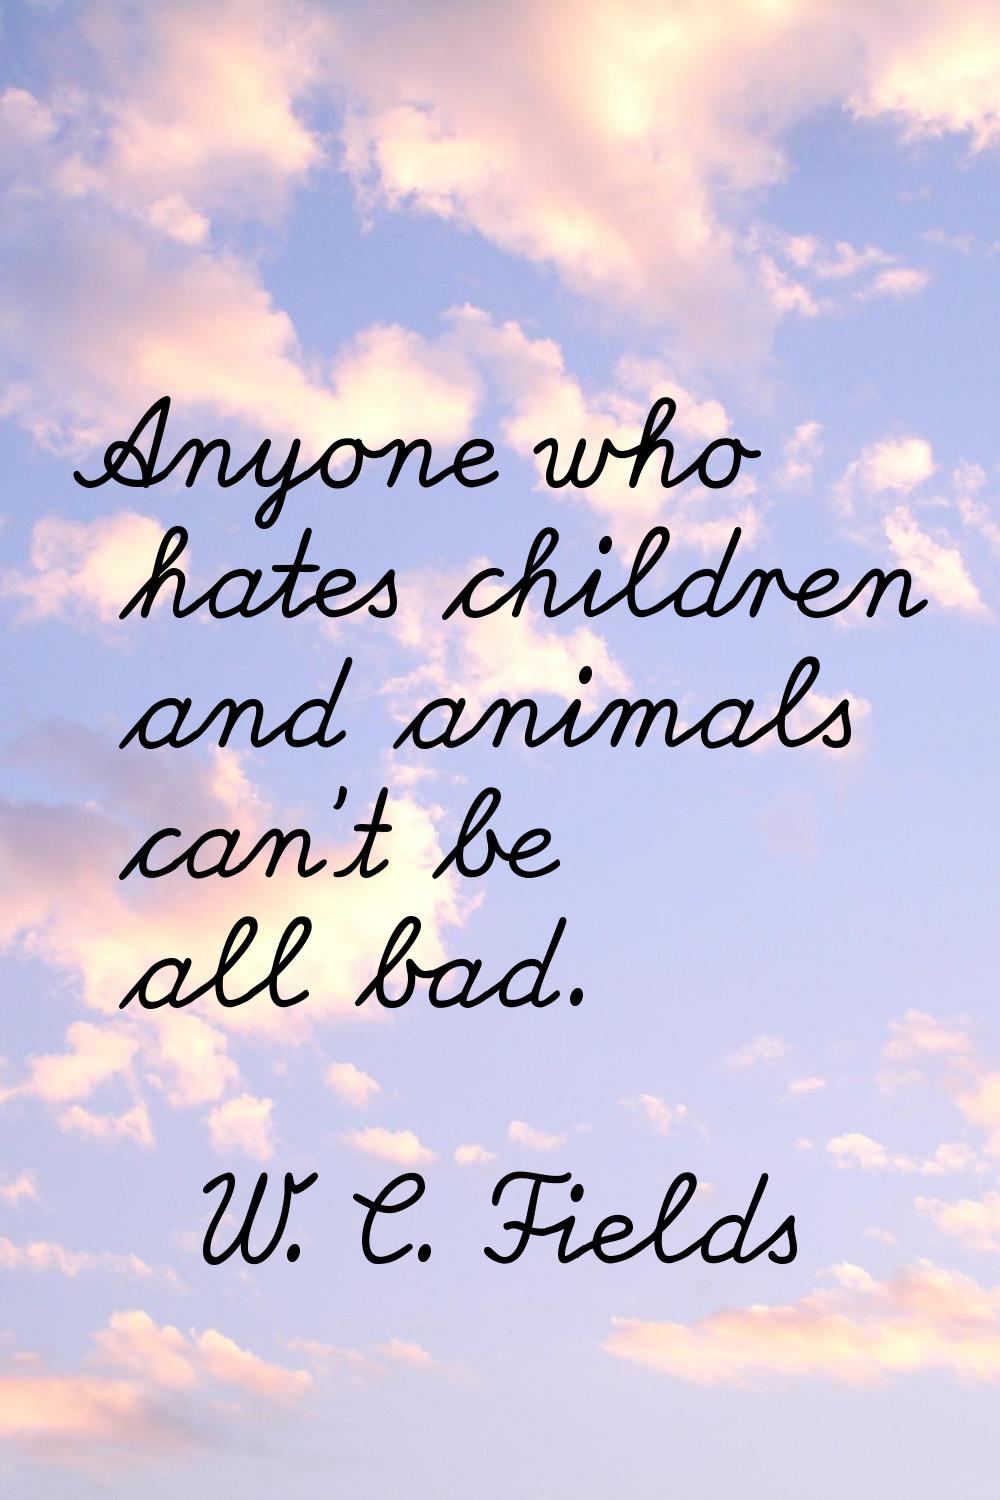 Anyone who hates children and animals can't be all bad.